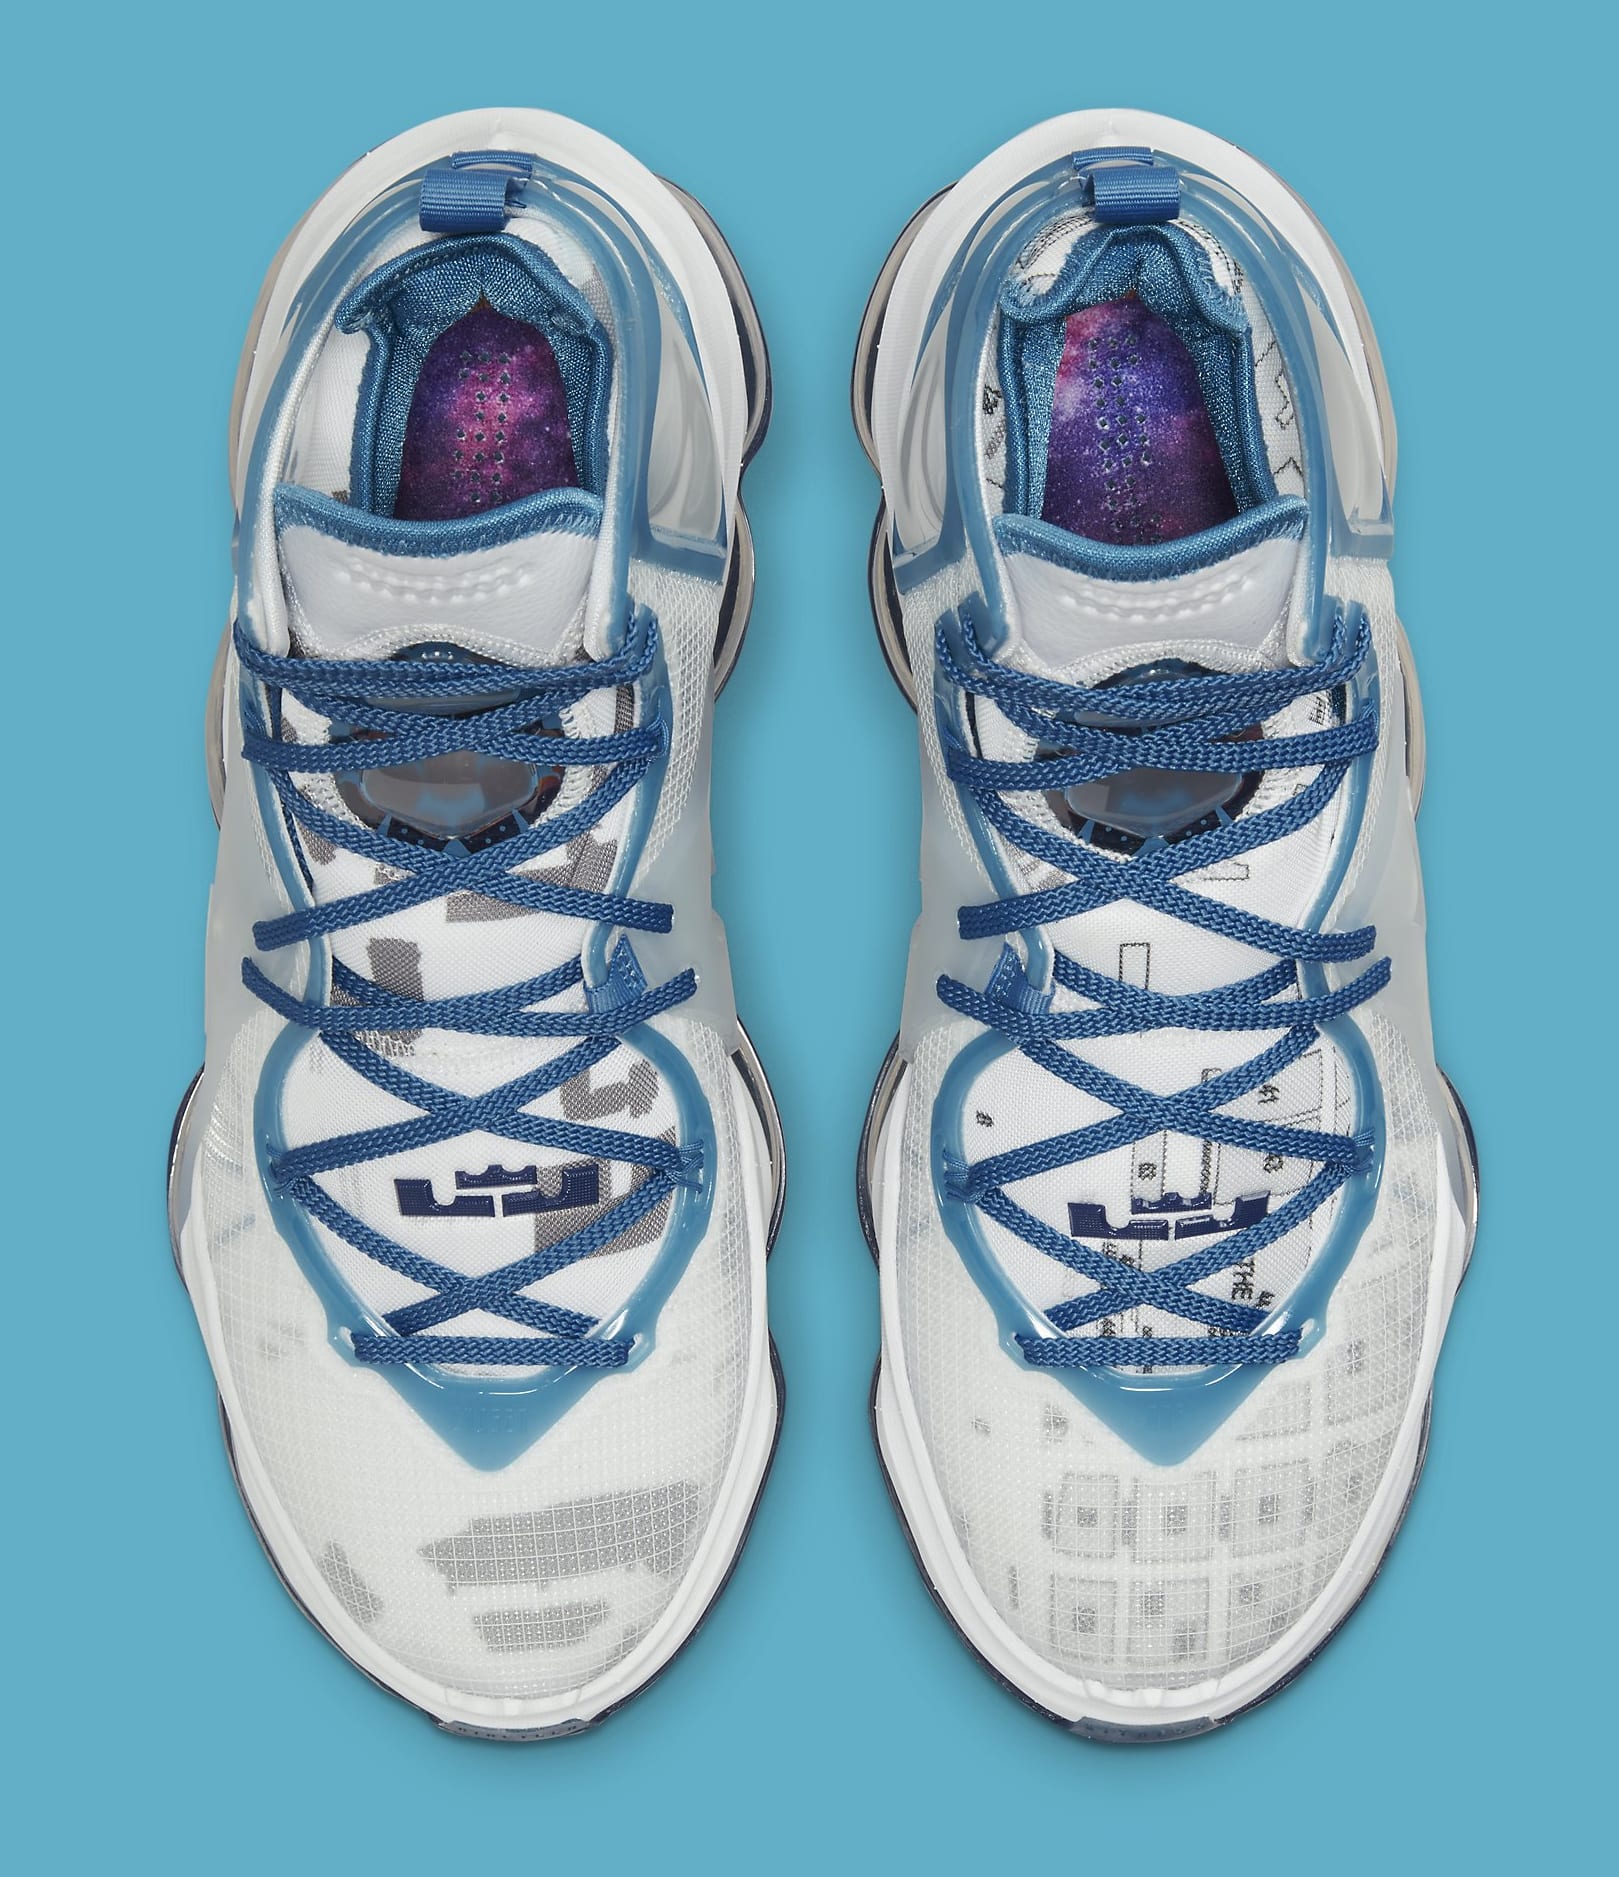 LeBron James to debut the Nike LeBron 19 in 'Space Jam: A New Legacy